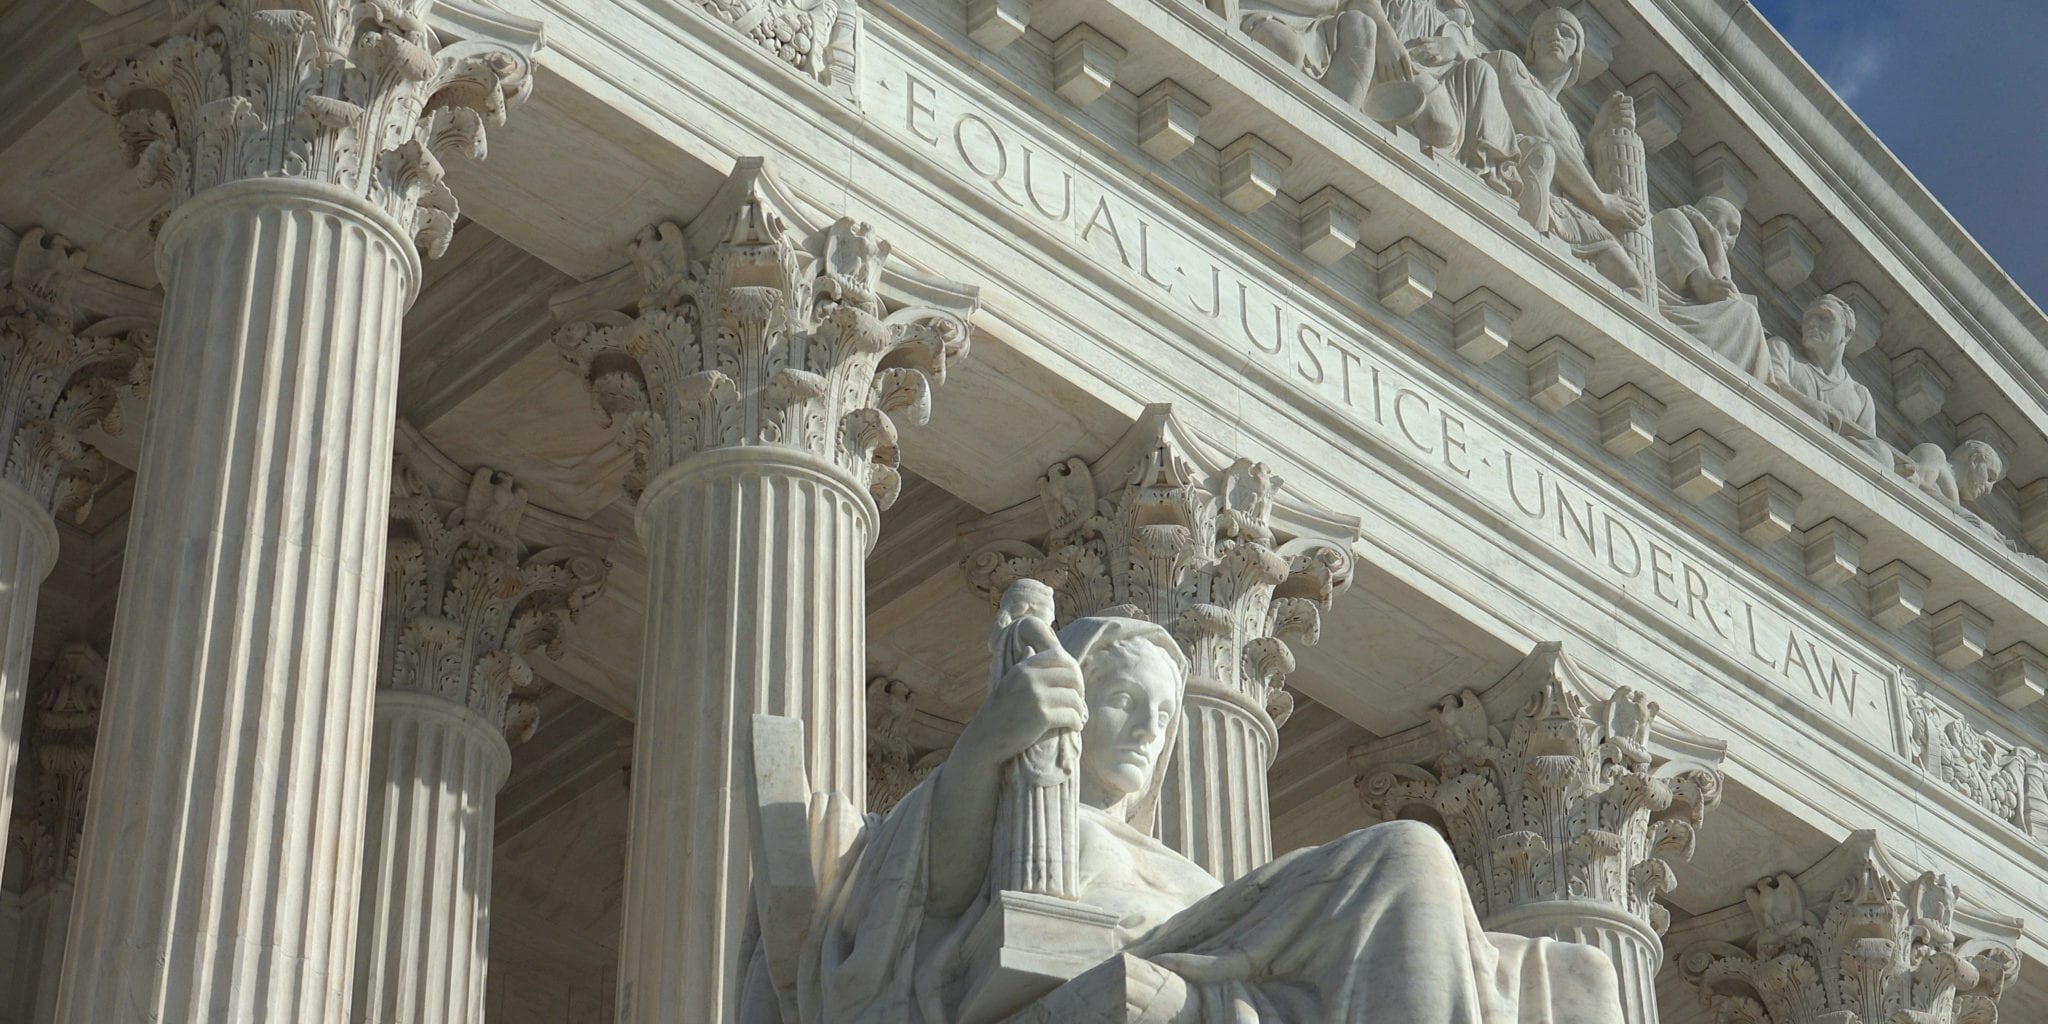 Closeup view of the United States Supreme Court exterior, with the words, "Equal justice under law" visible